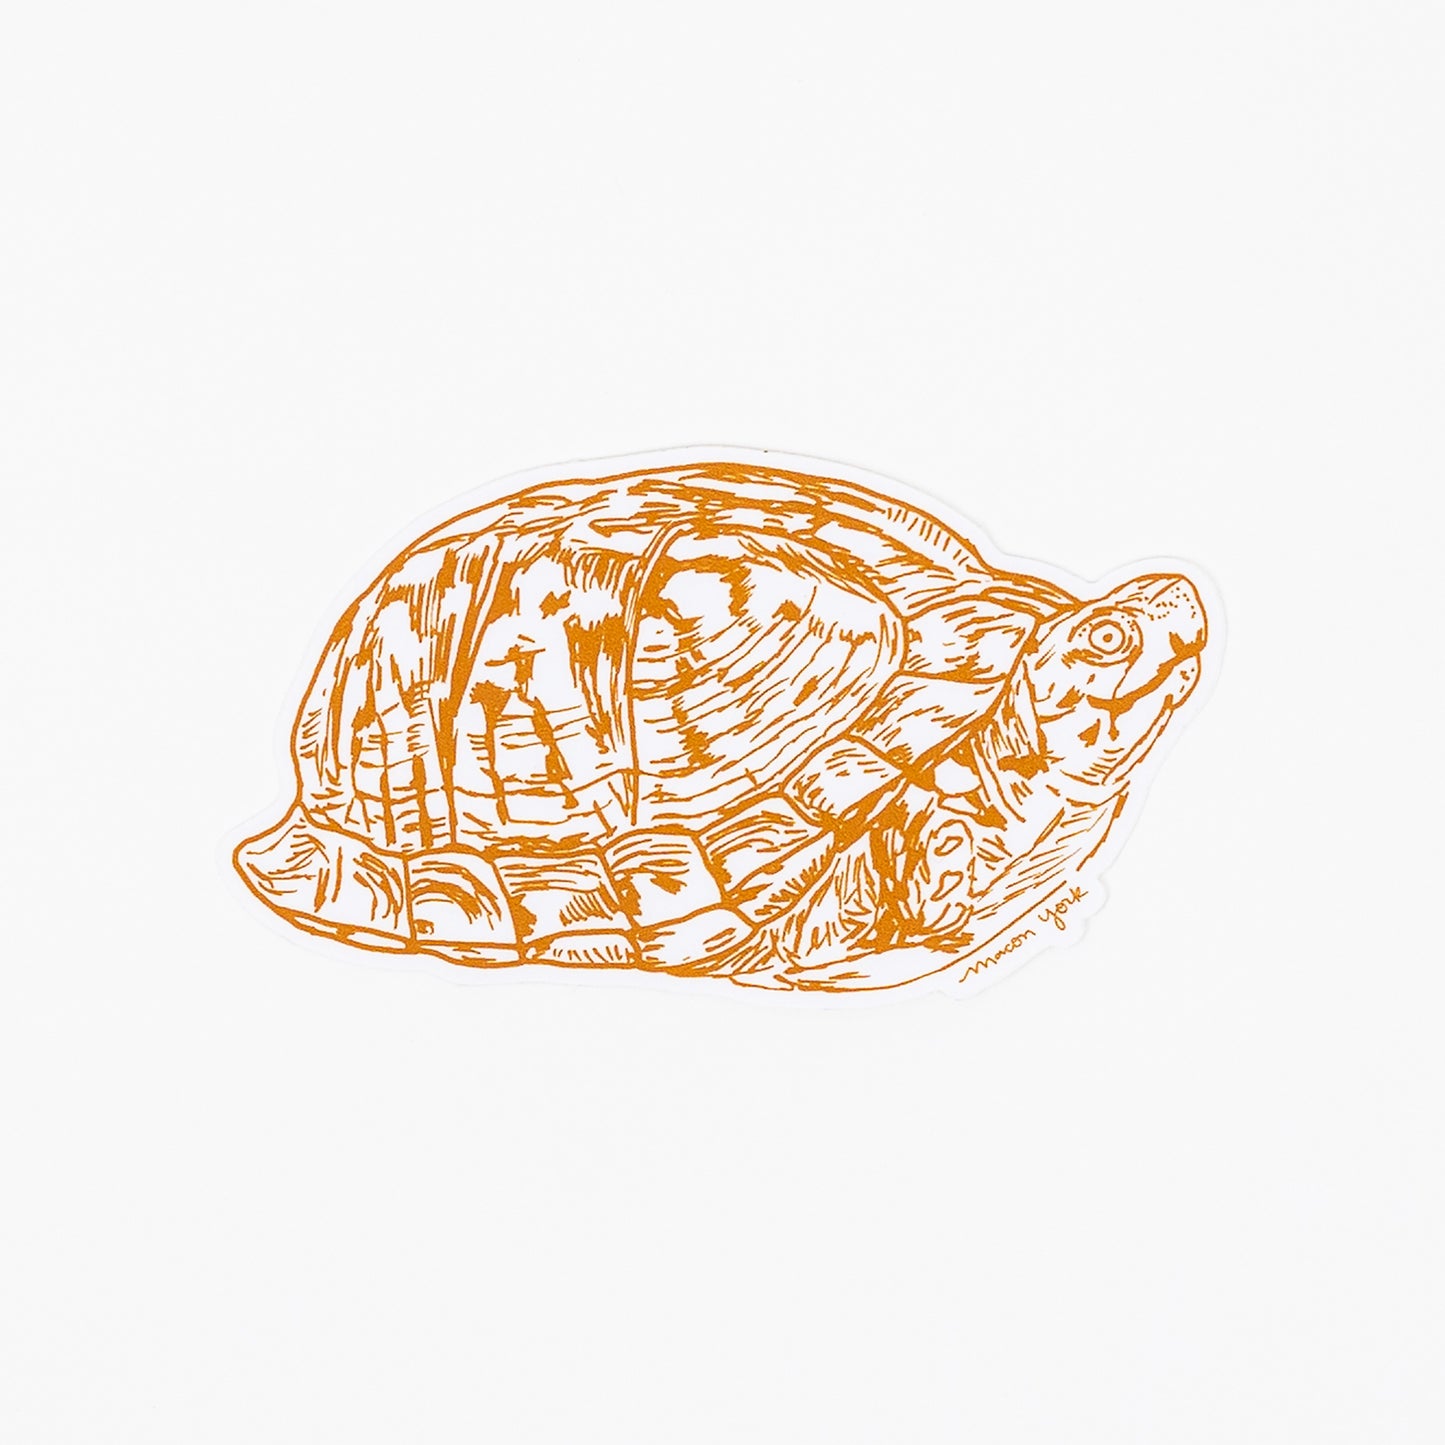 This Box Turtle sticker is a premium vinyl sticker that captures the beauty of the summertime Appalachian mountains. It features a hand-drawn image of the iconic box turtle, perfect for those who appreciate the natural wonders of the region. Printed in a deep burnt orange ink. 4" x 2" Vinyl Sticker